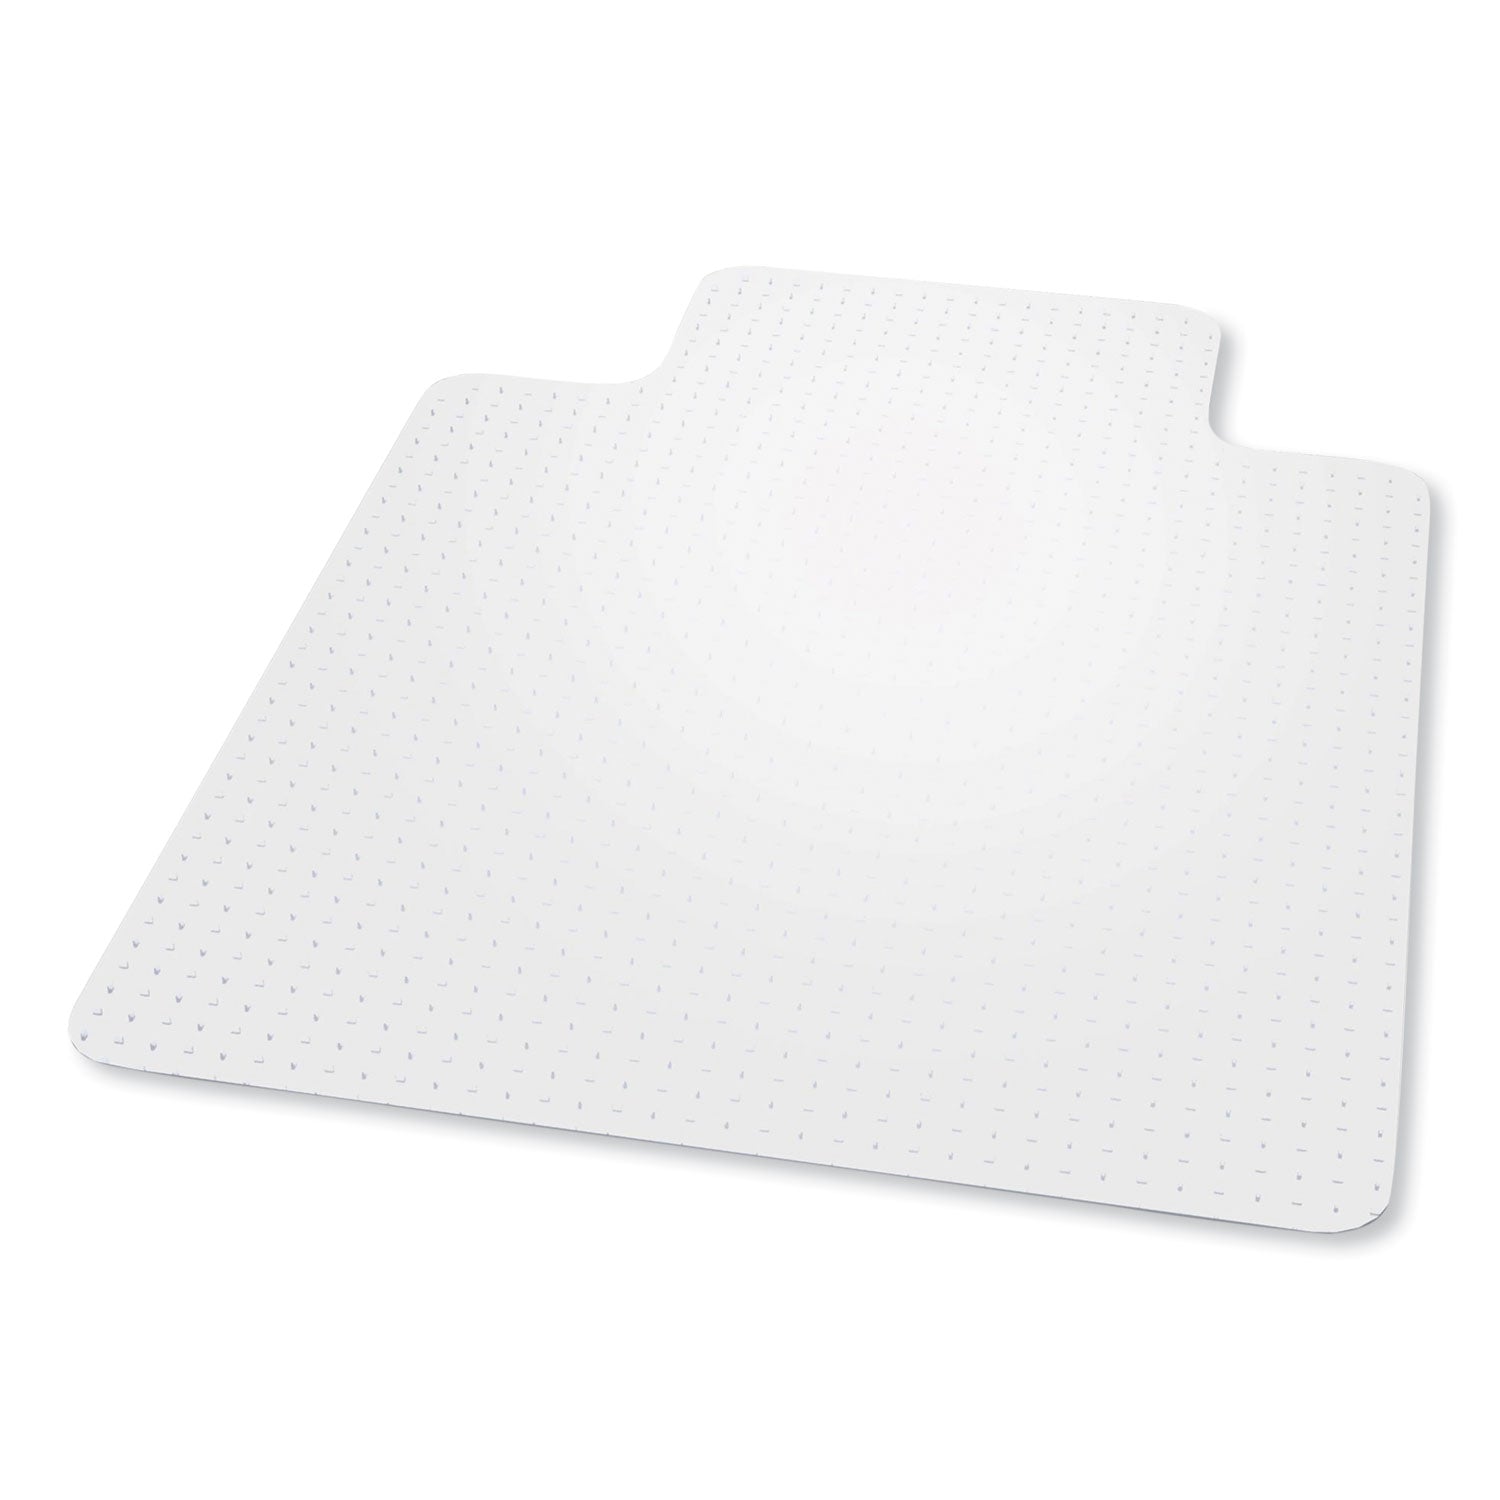 everlife-chair-mat-for-extra-high-pile-carpet-with-lip-36-x-48-clear-ships-in-4-6-business-days_esr124083 - 1